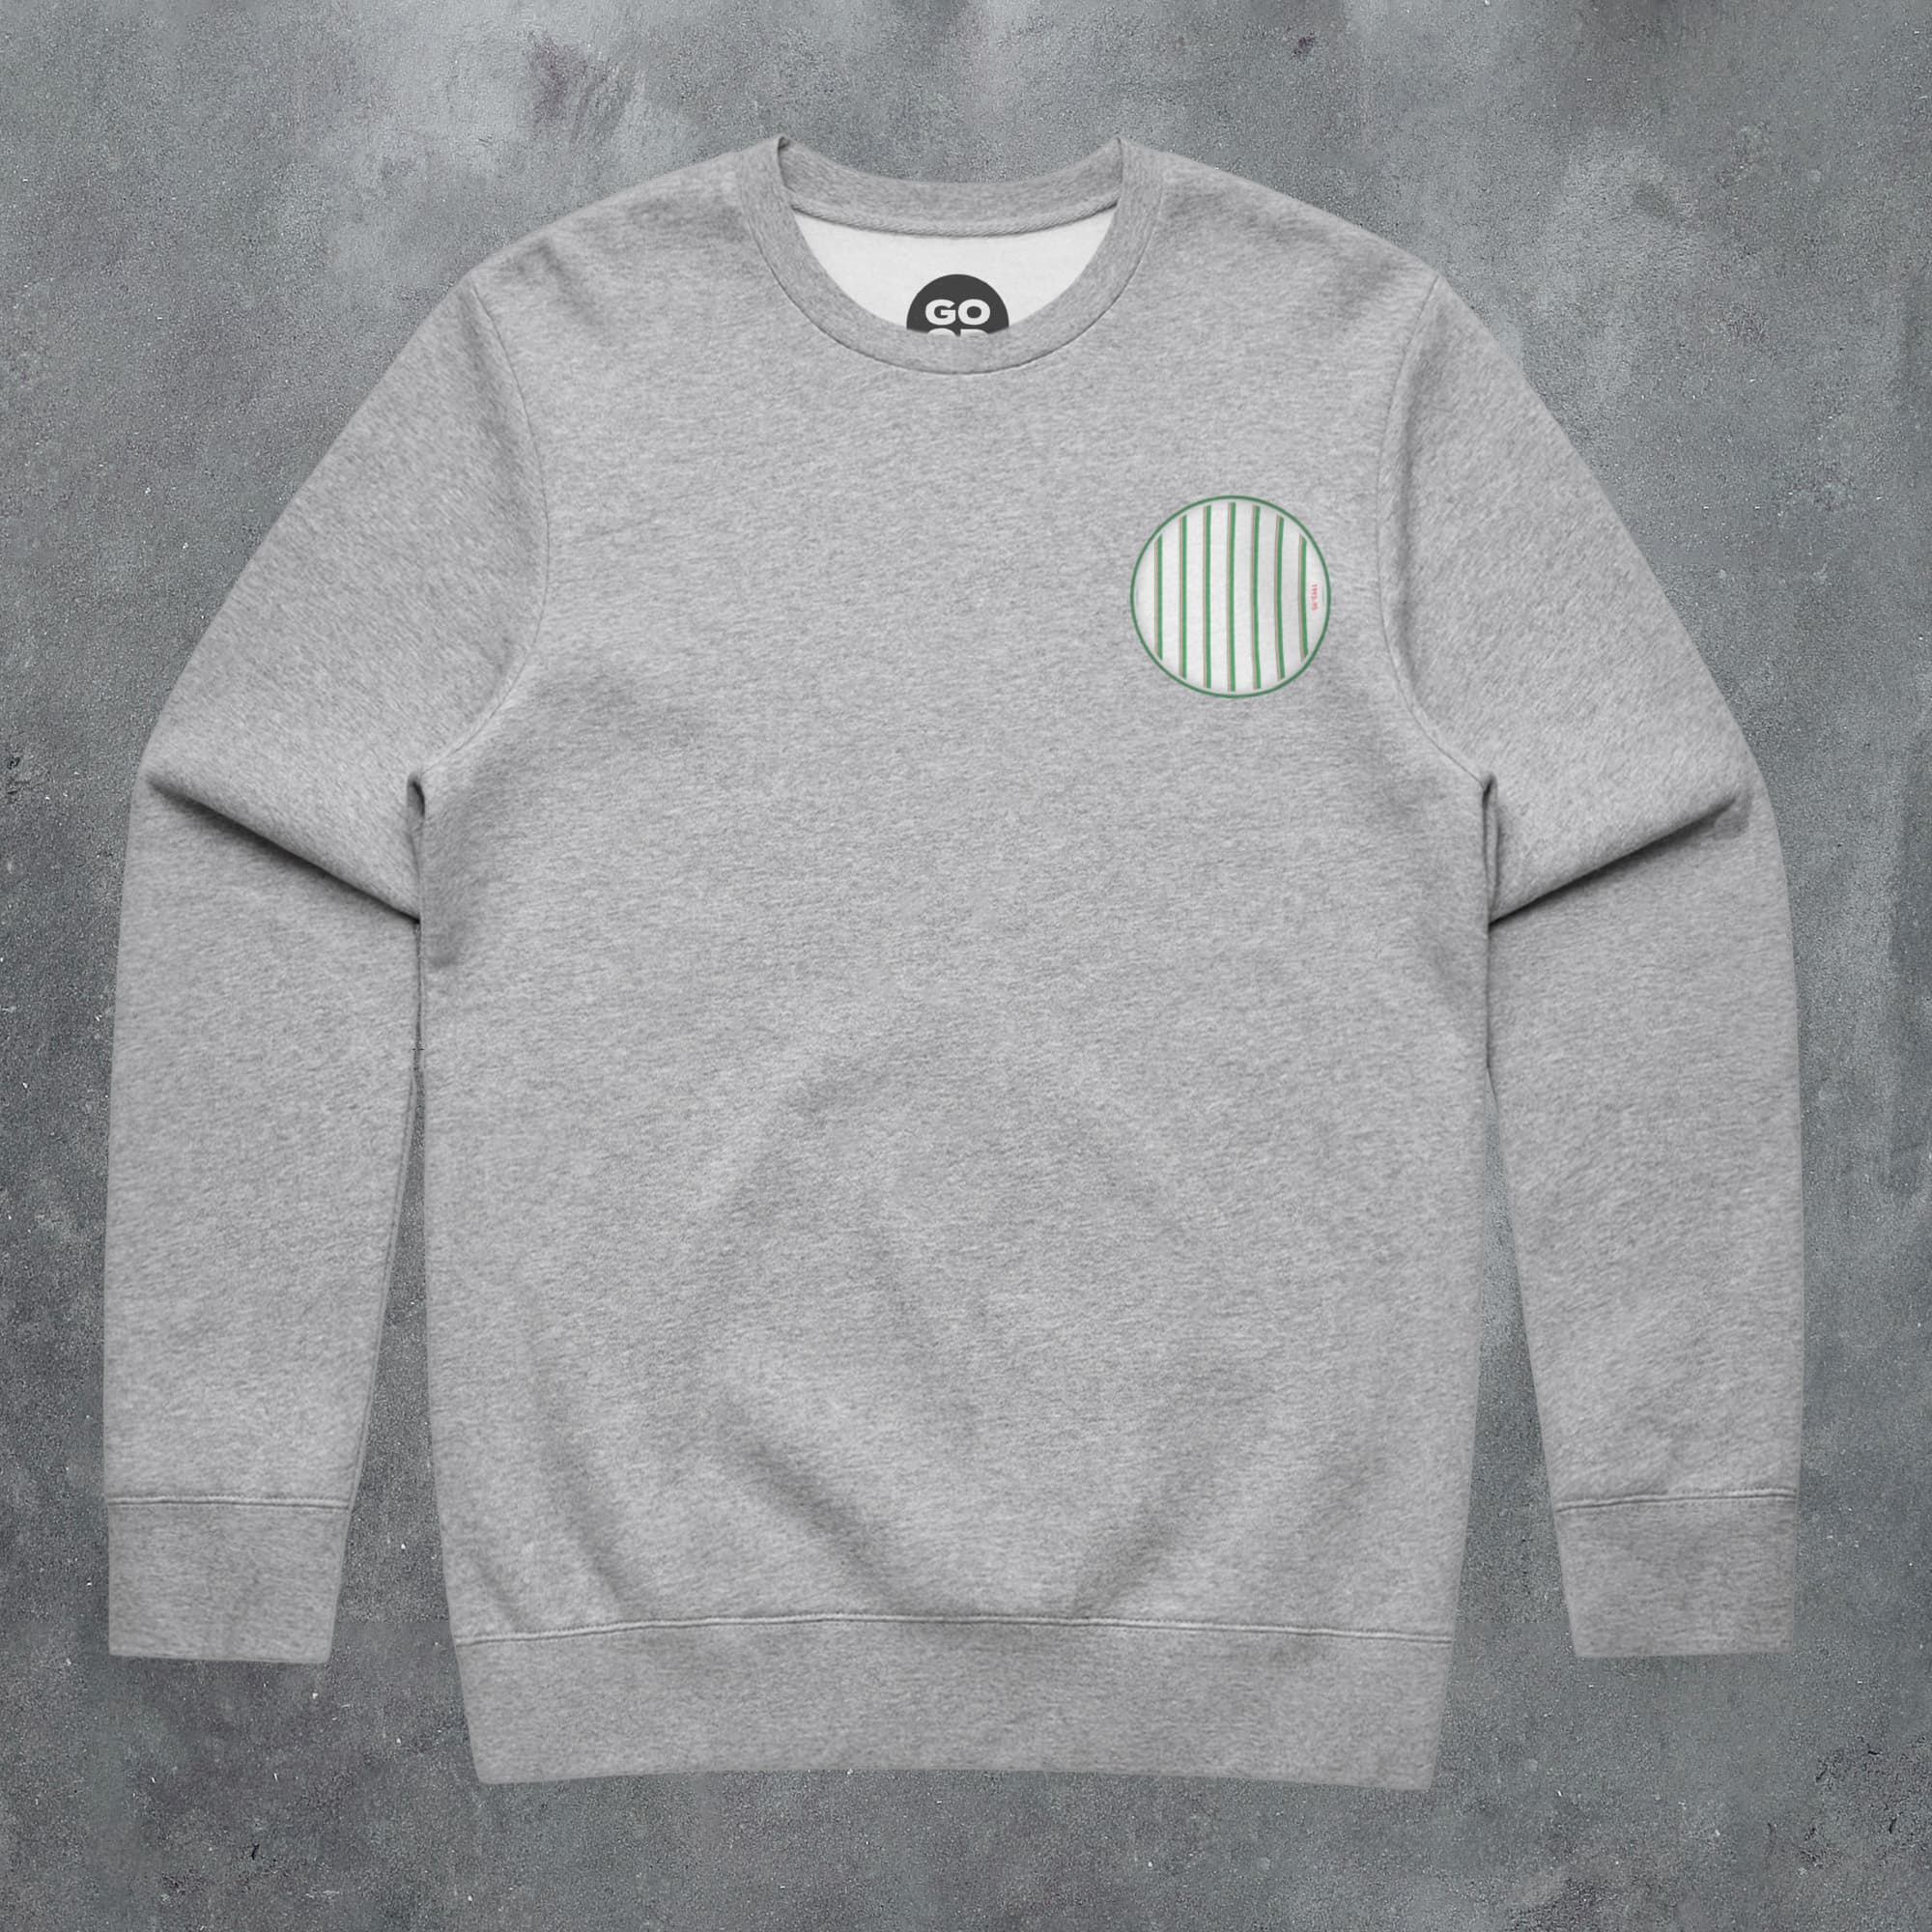 a grey sweatshirt with a green circle on it